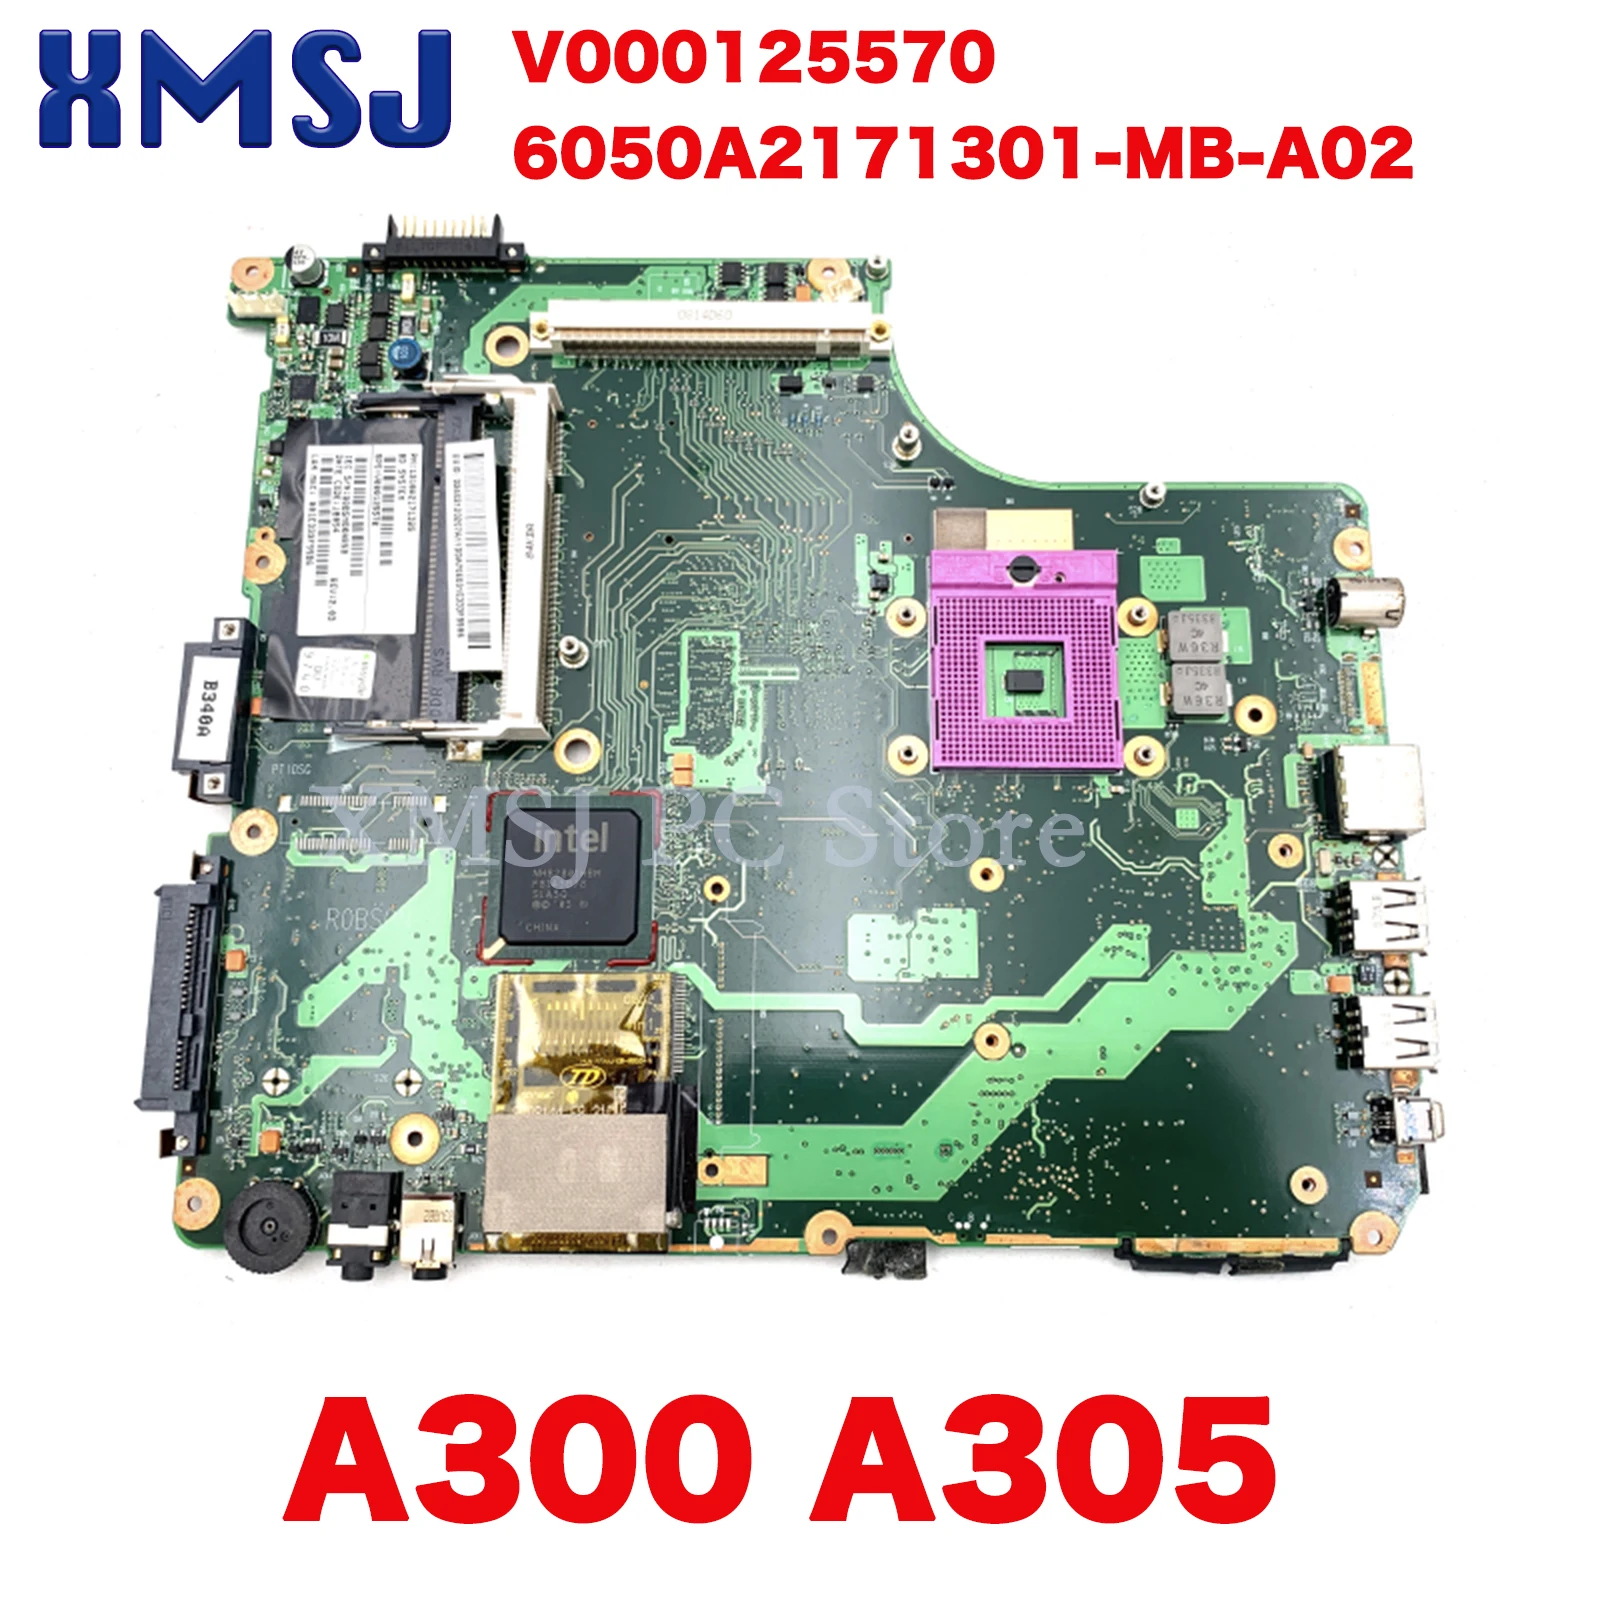 XMSJ V000125570 6050A2171301-MB-A02 for TOSHIBA Satellite A300 A305 laptop motherboard 965PM DDR2 with graphics slot